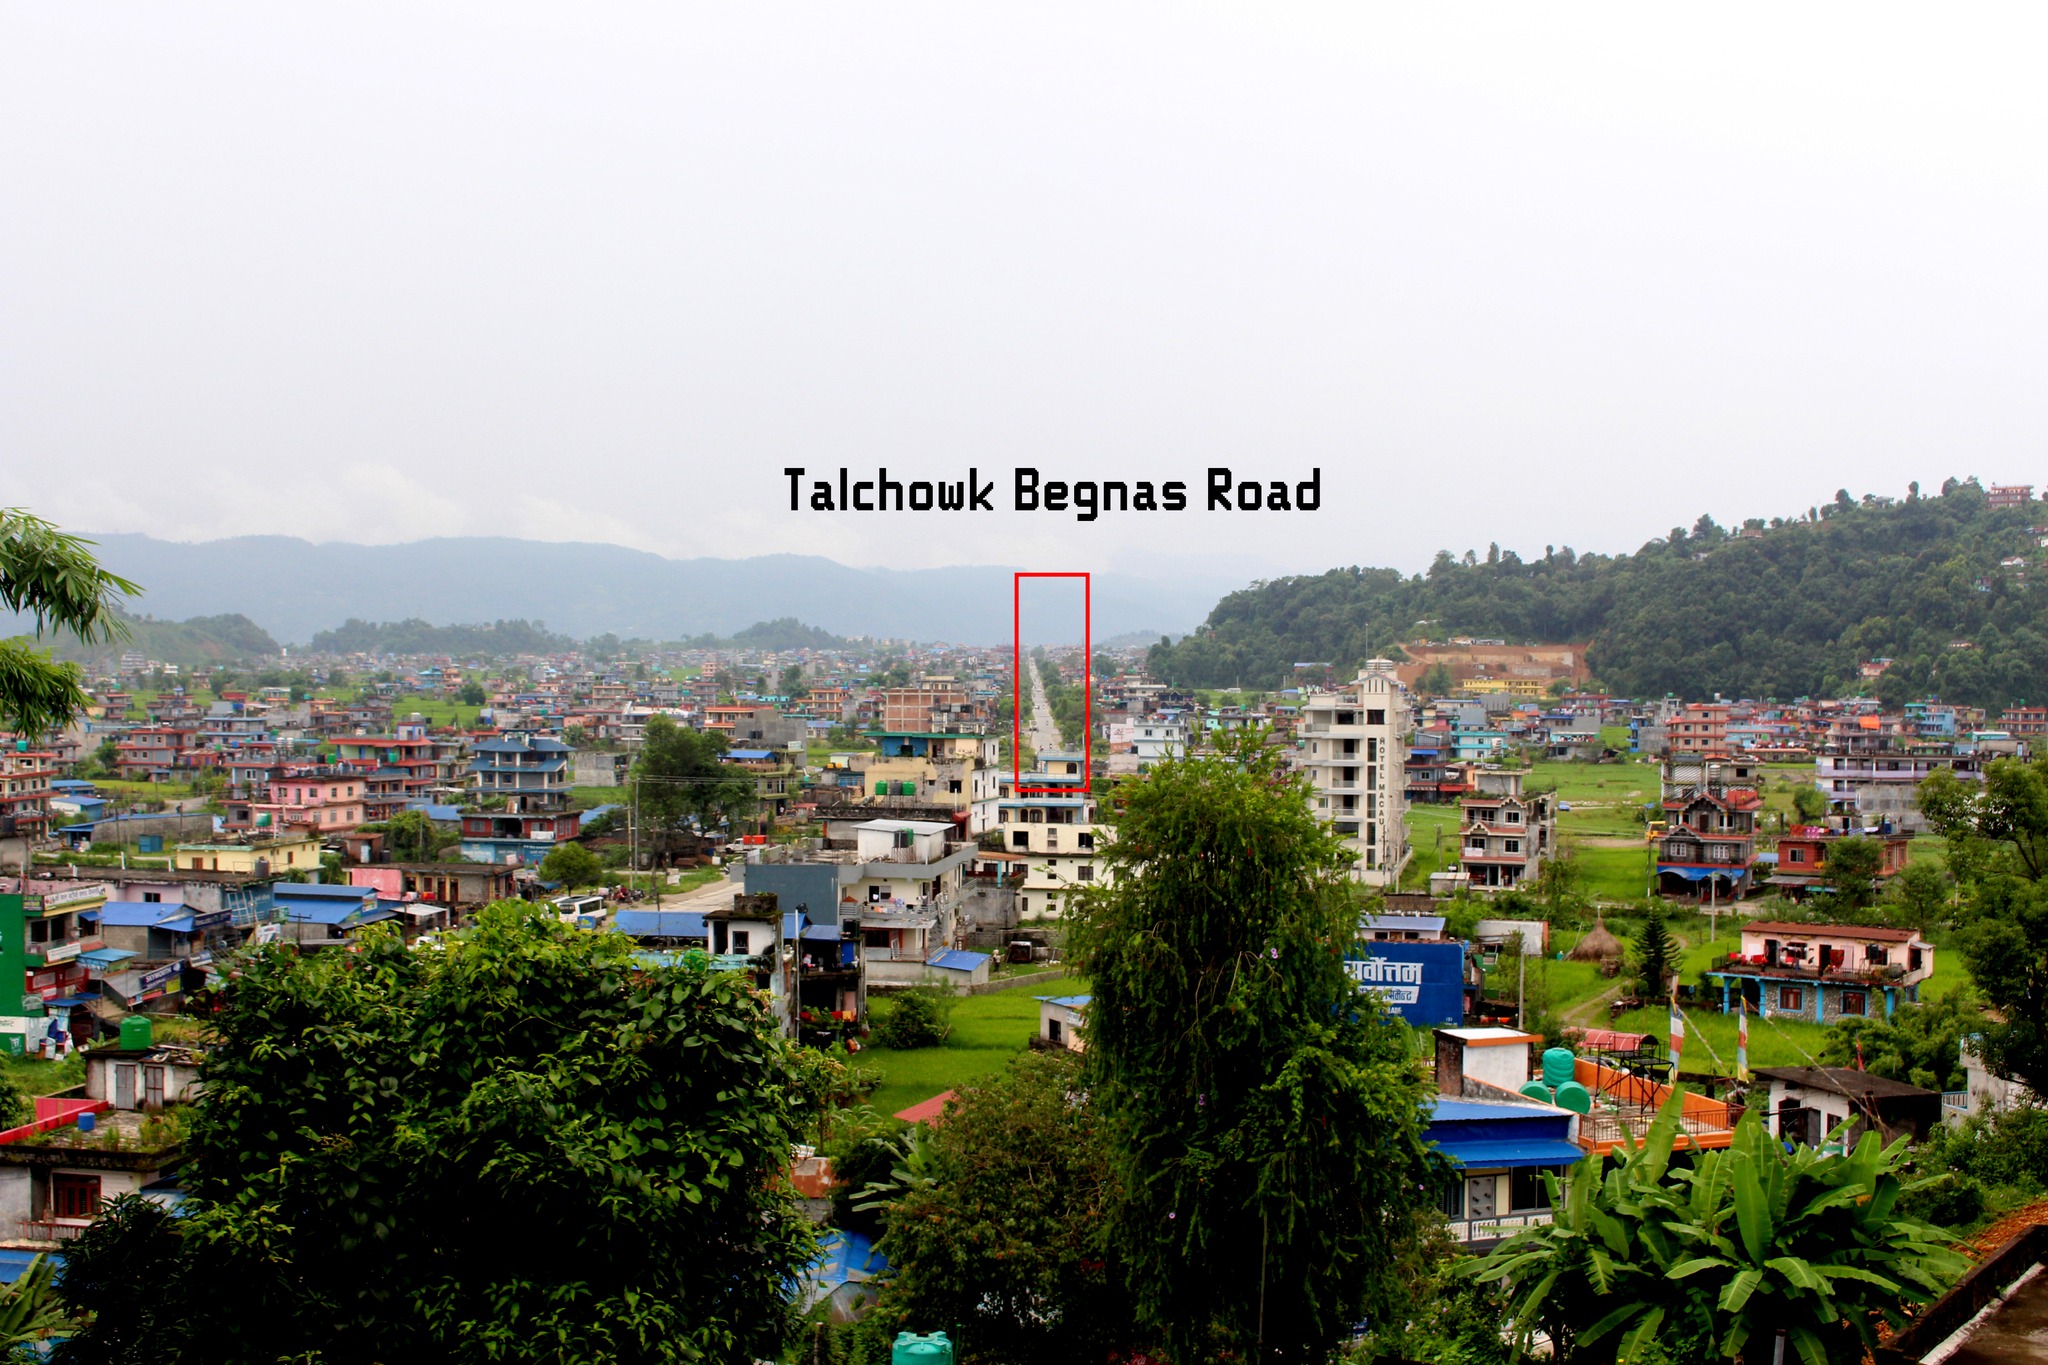 Construction of Talchowk-Begnas road starting after 2 years of contract